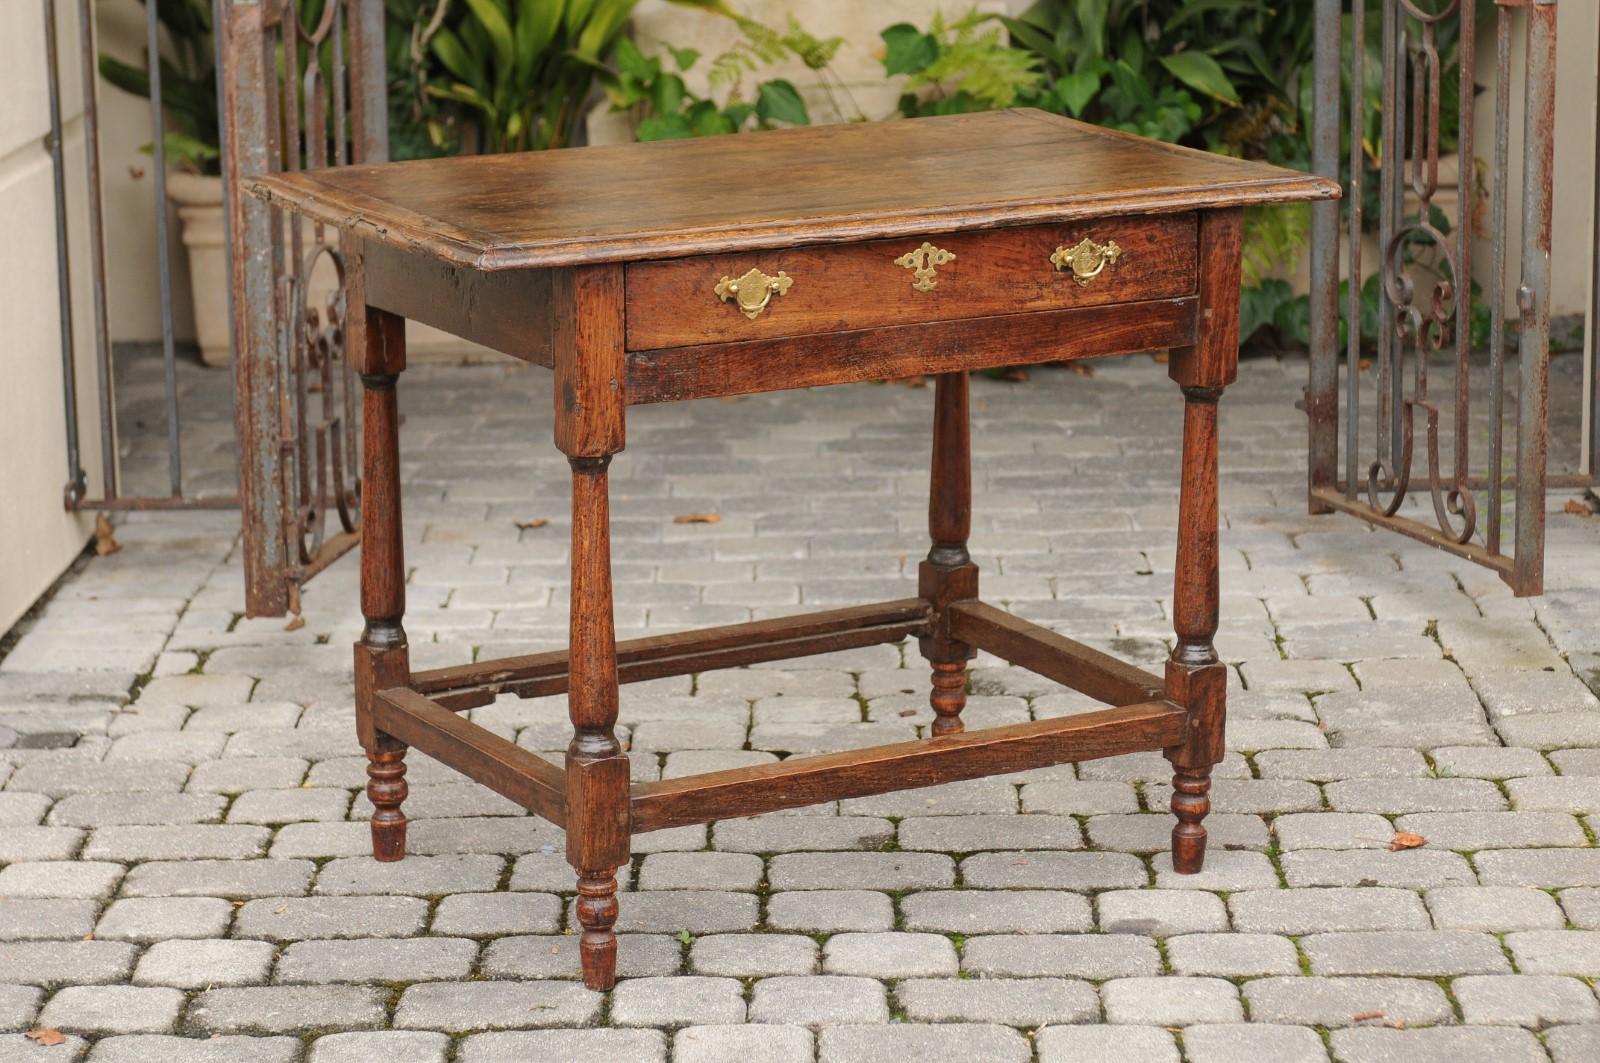 English 1860s Oak Side Table with Drawer, Turned Baluster Legs and Stretcher (19. Jahrhundert)